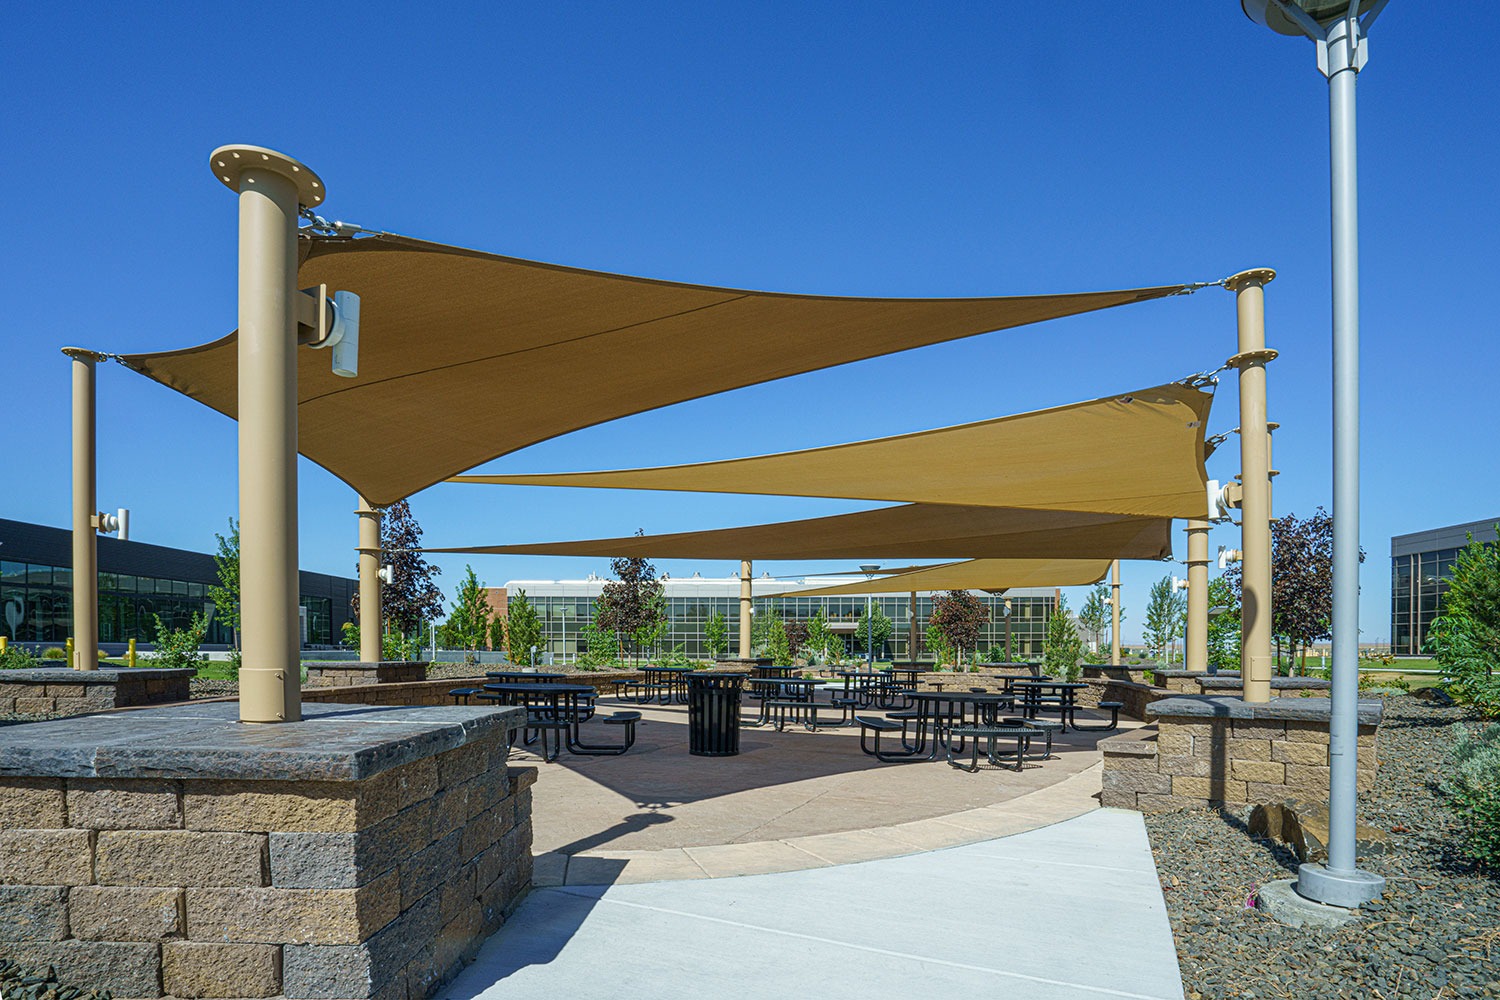 How Business Can Use High Performance Shade Structures & Sales